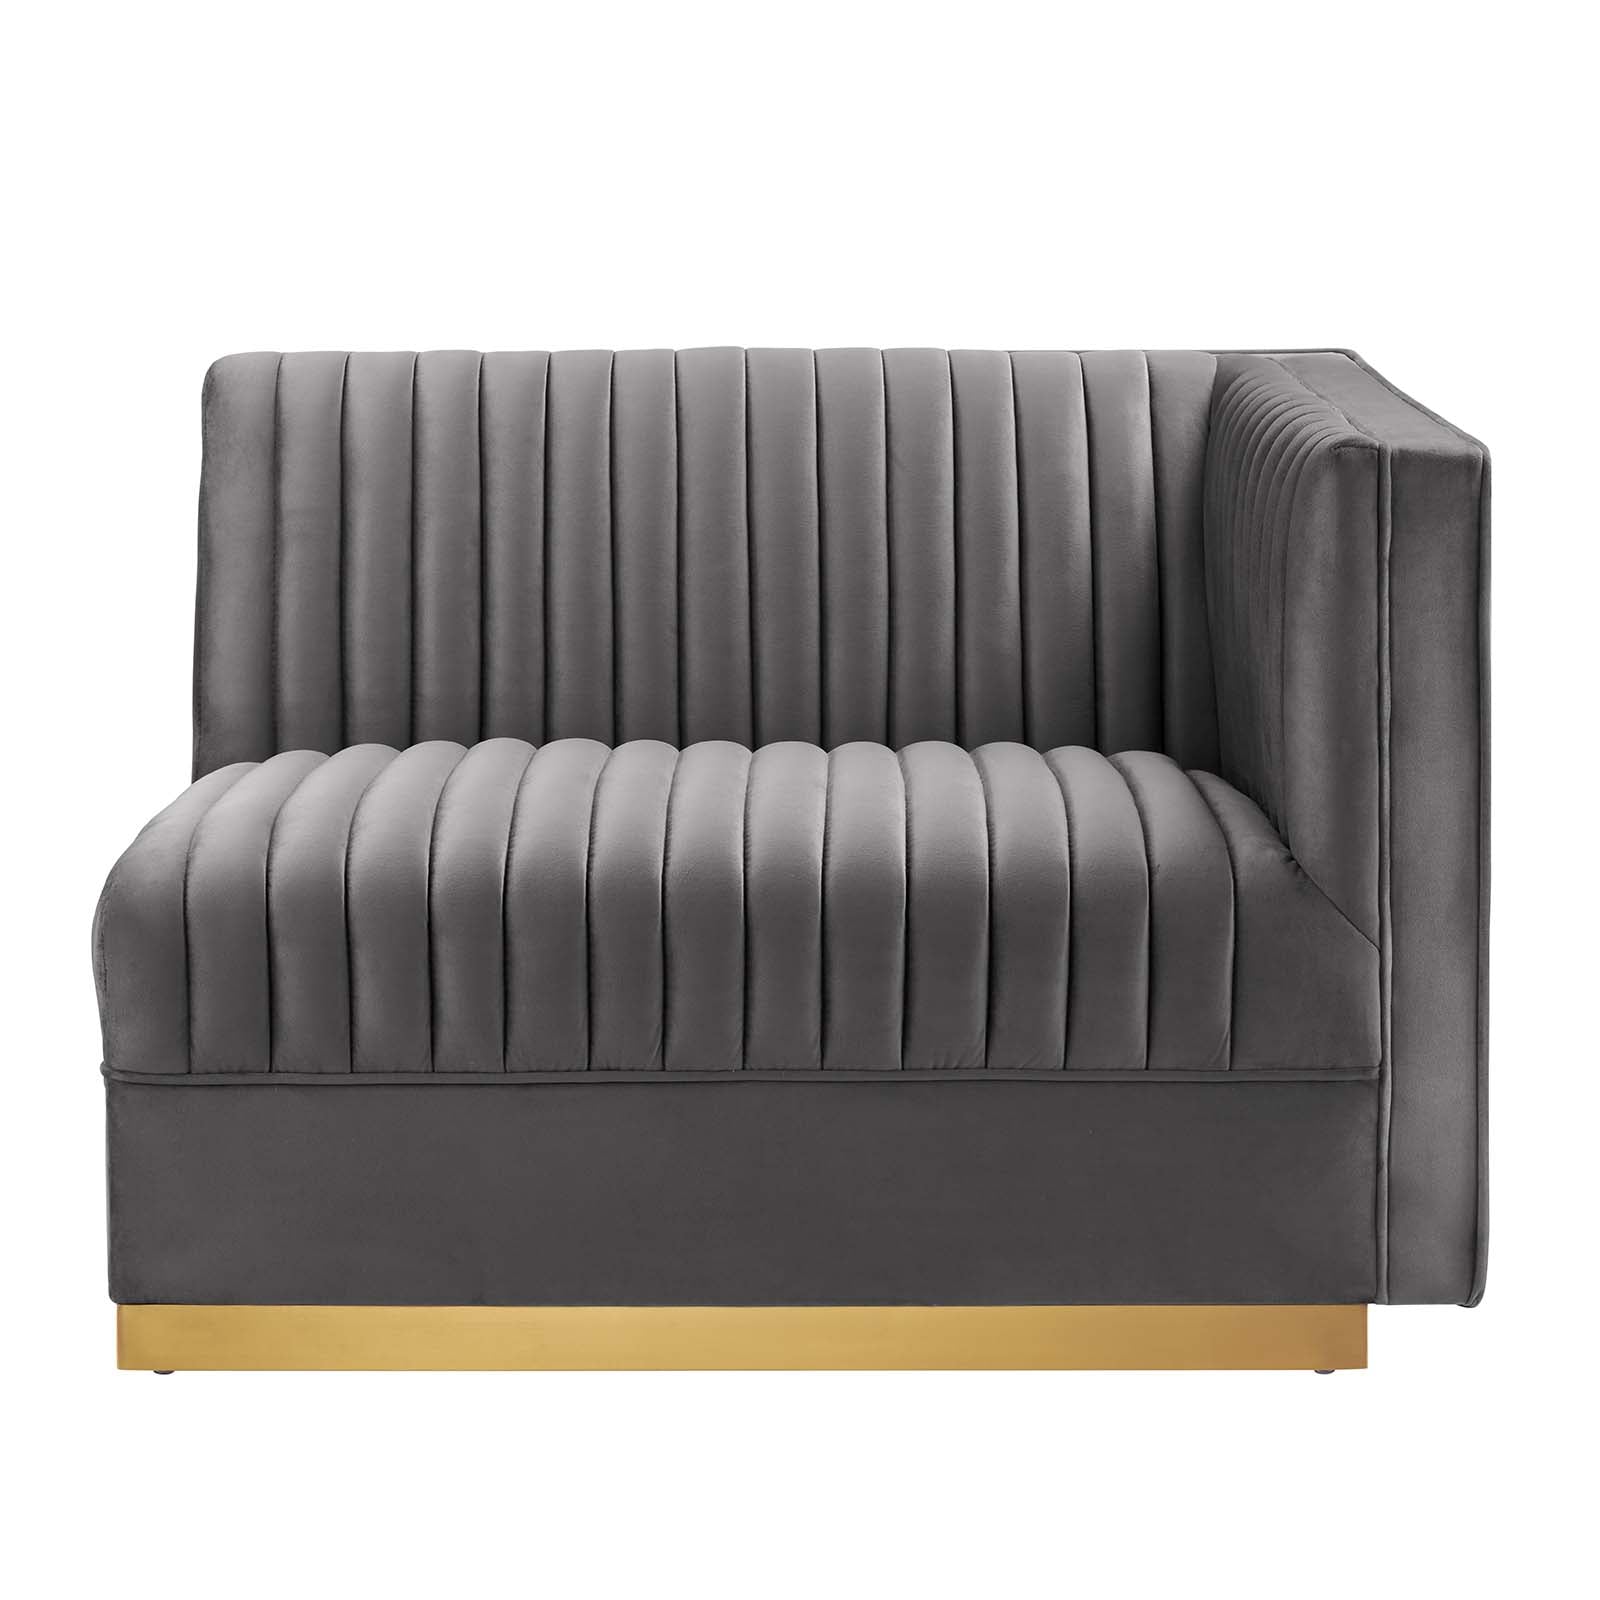 Modway Accent Chairs - Sanguine Channel Tufted Performance Velvet Modular Sectional Sofa Right-Arm Chair Gray